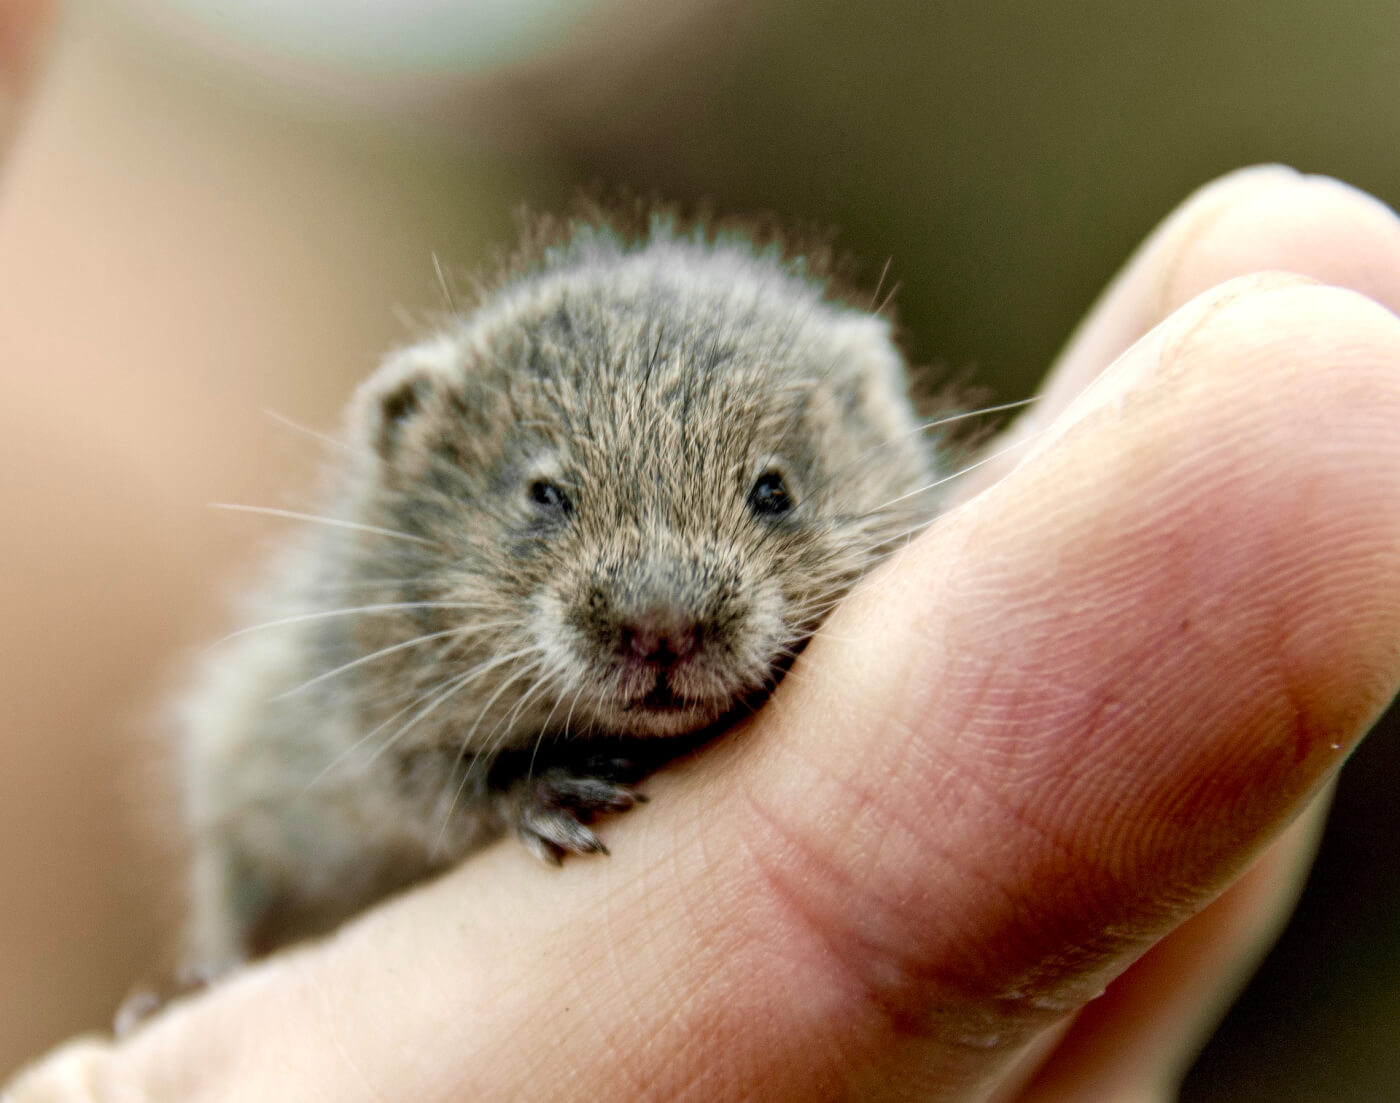 VIV Vole Held in Hand Pixabay NC VS OHSU Repeatedly Lied to Cover Up Drunken Vole Videos